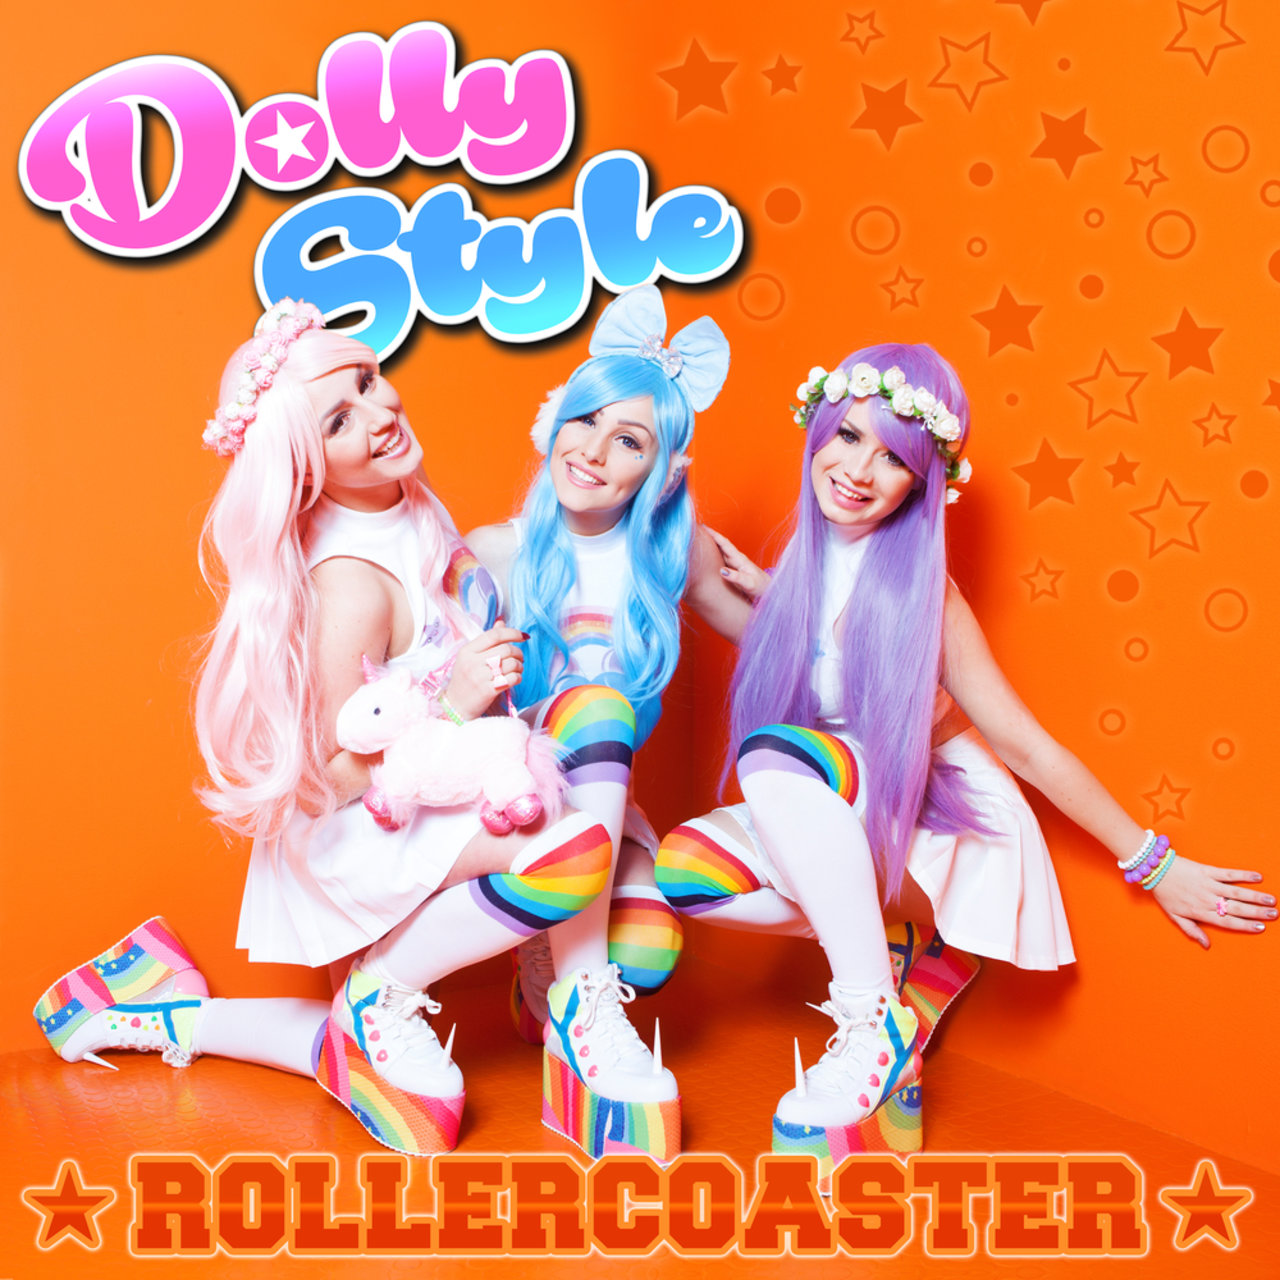 Dolly Style — Rollercoaster cover artwork